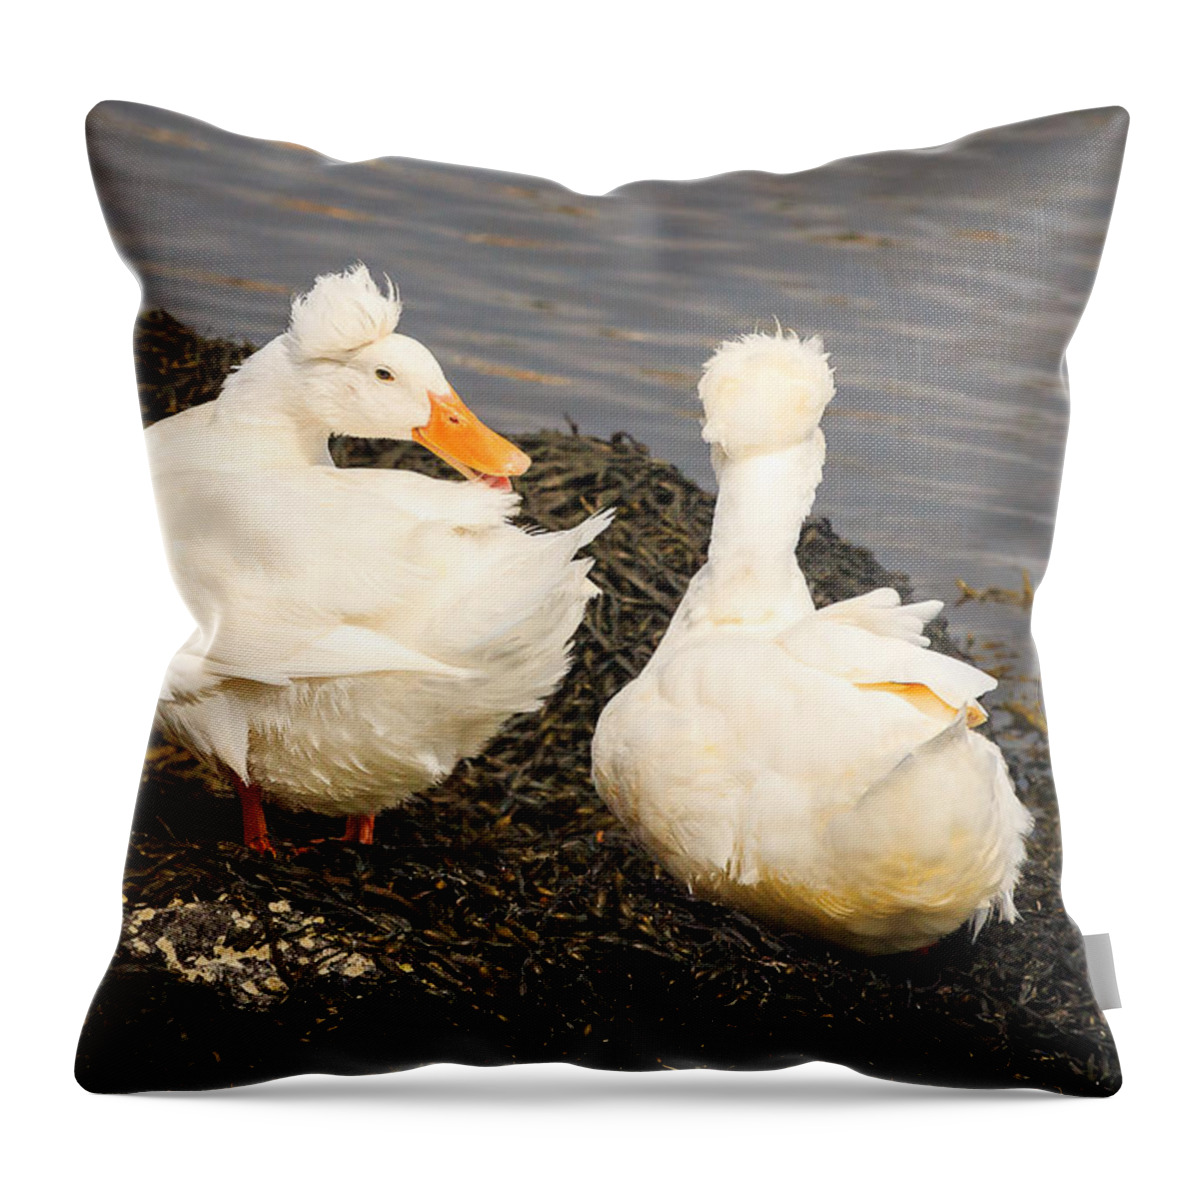 Crested White Duck Throw Pillow featuring the photograph White Crested Duck by Joni Eskridge